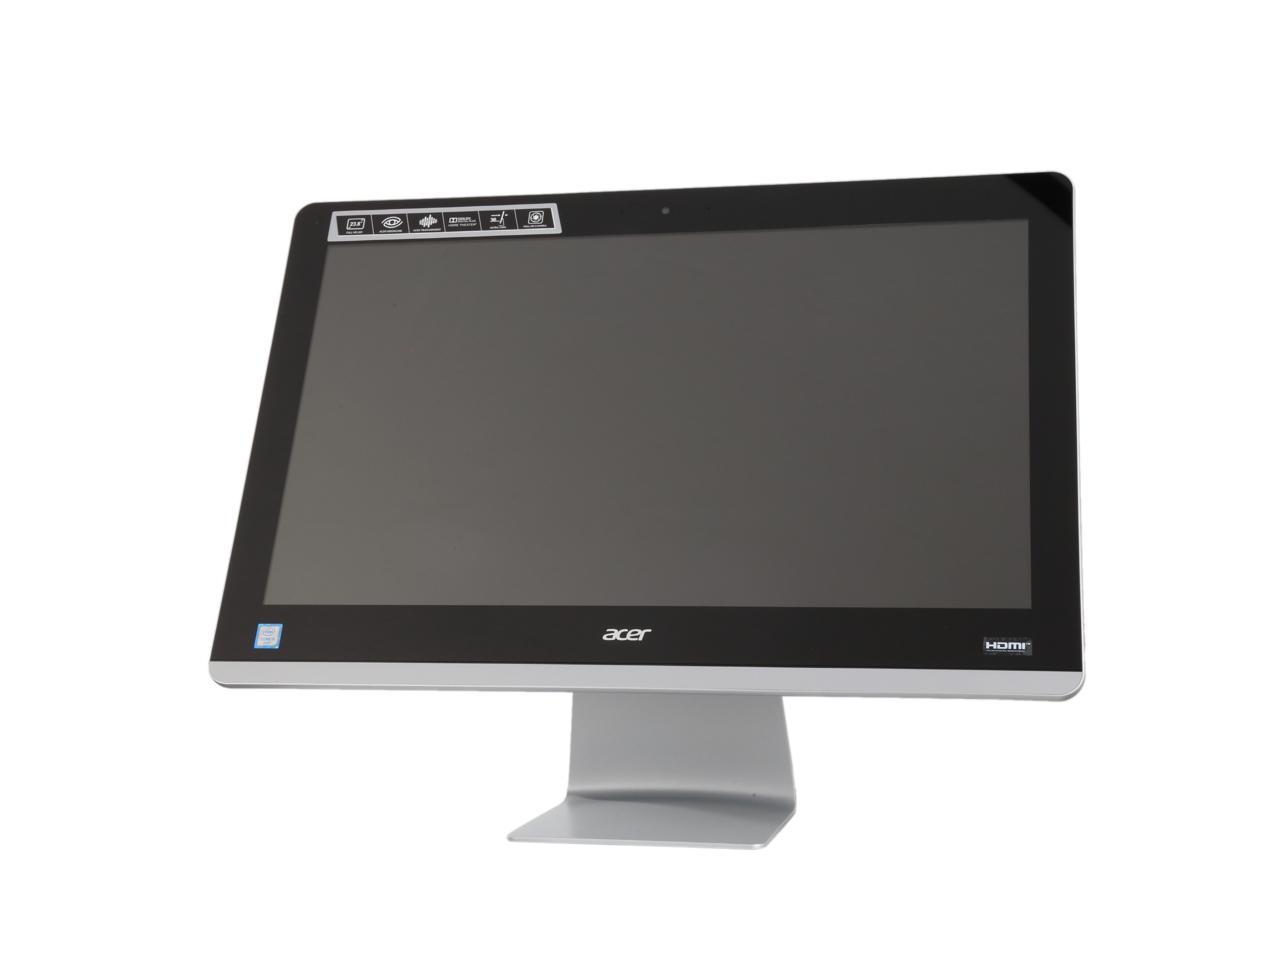 Acer All-in-One Computer Aspire Z AZ3-715-UR52 Intel Core i5 6400T (2.